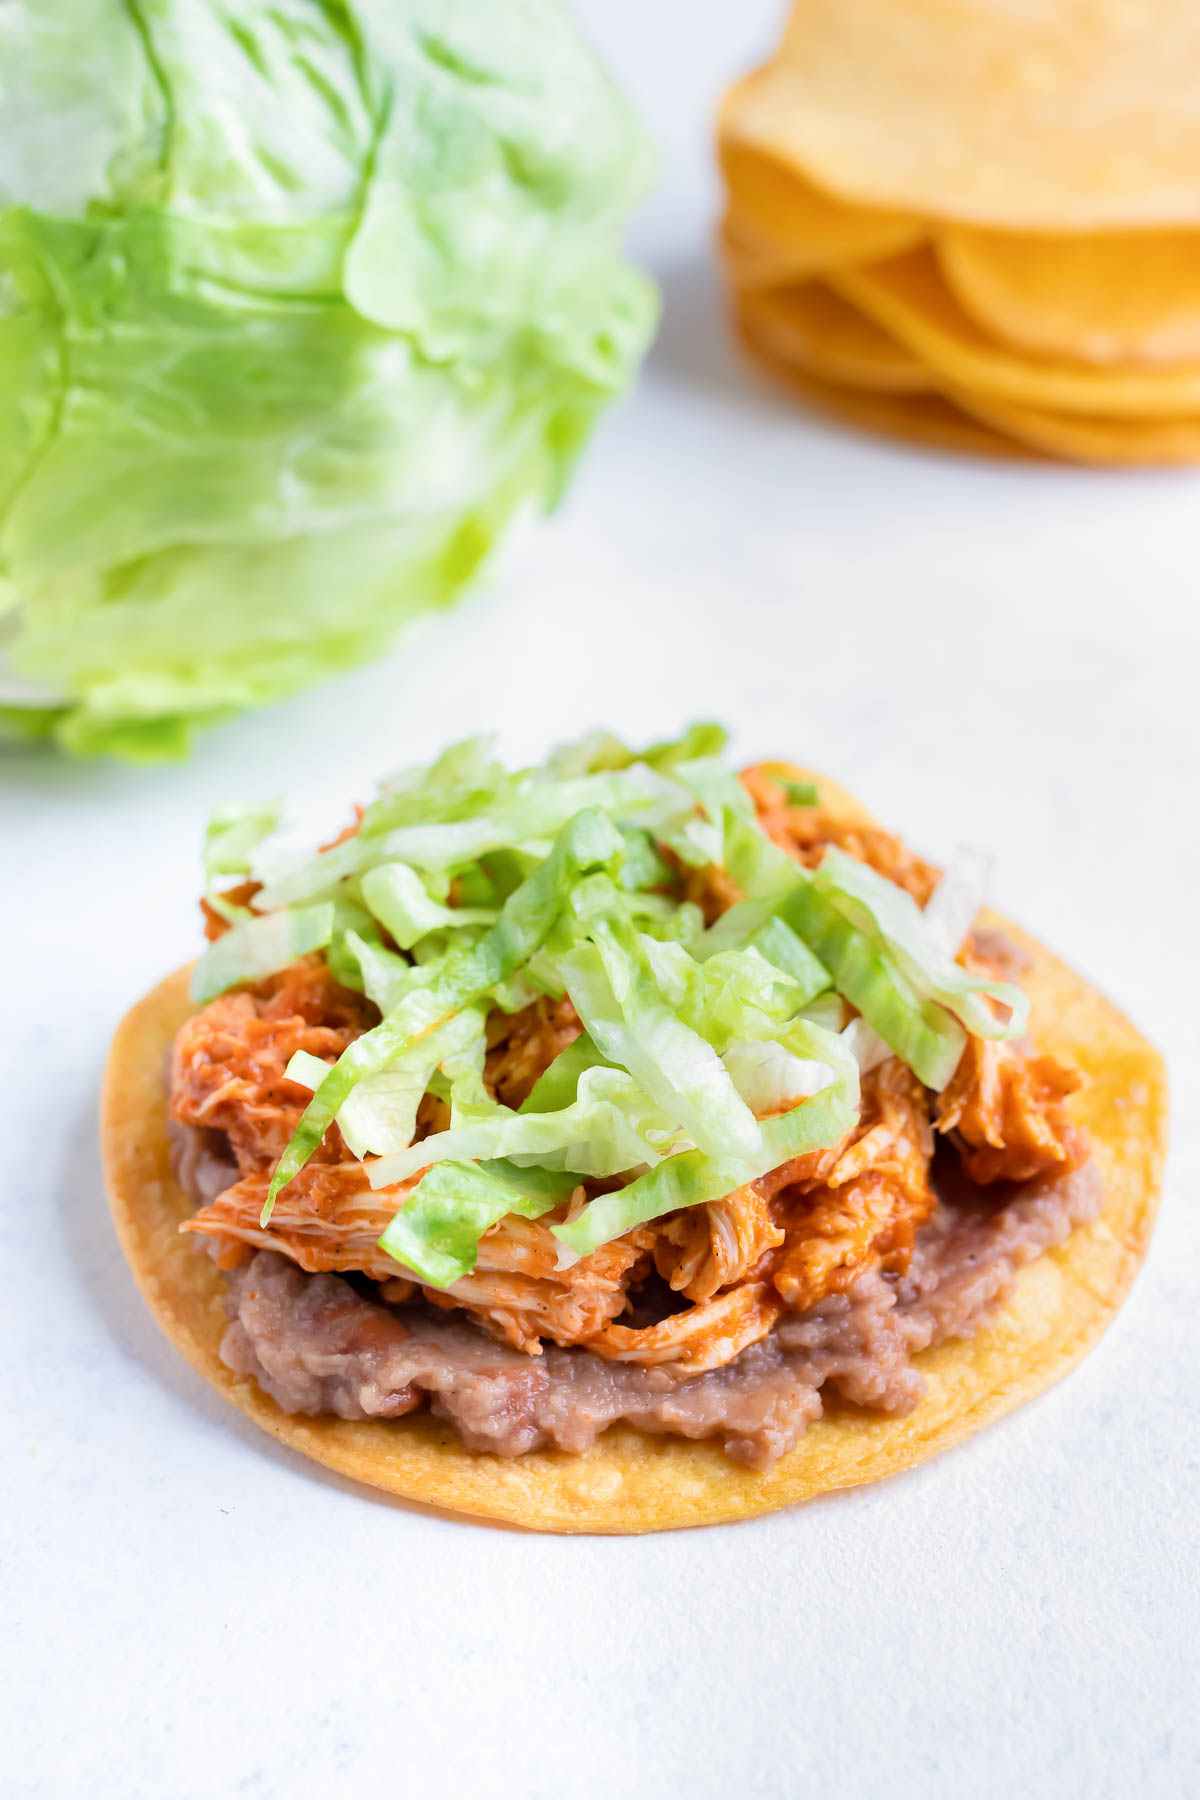 Lettuce is layered on to the chicken tinga tostada.